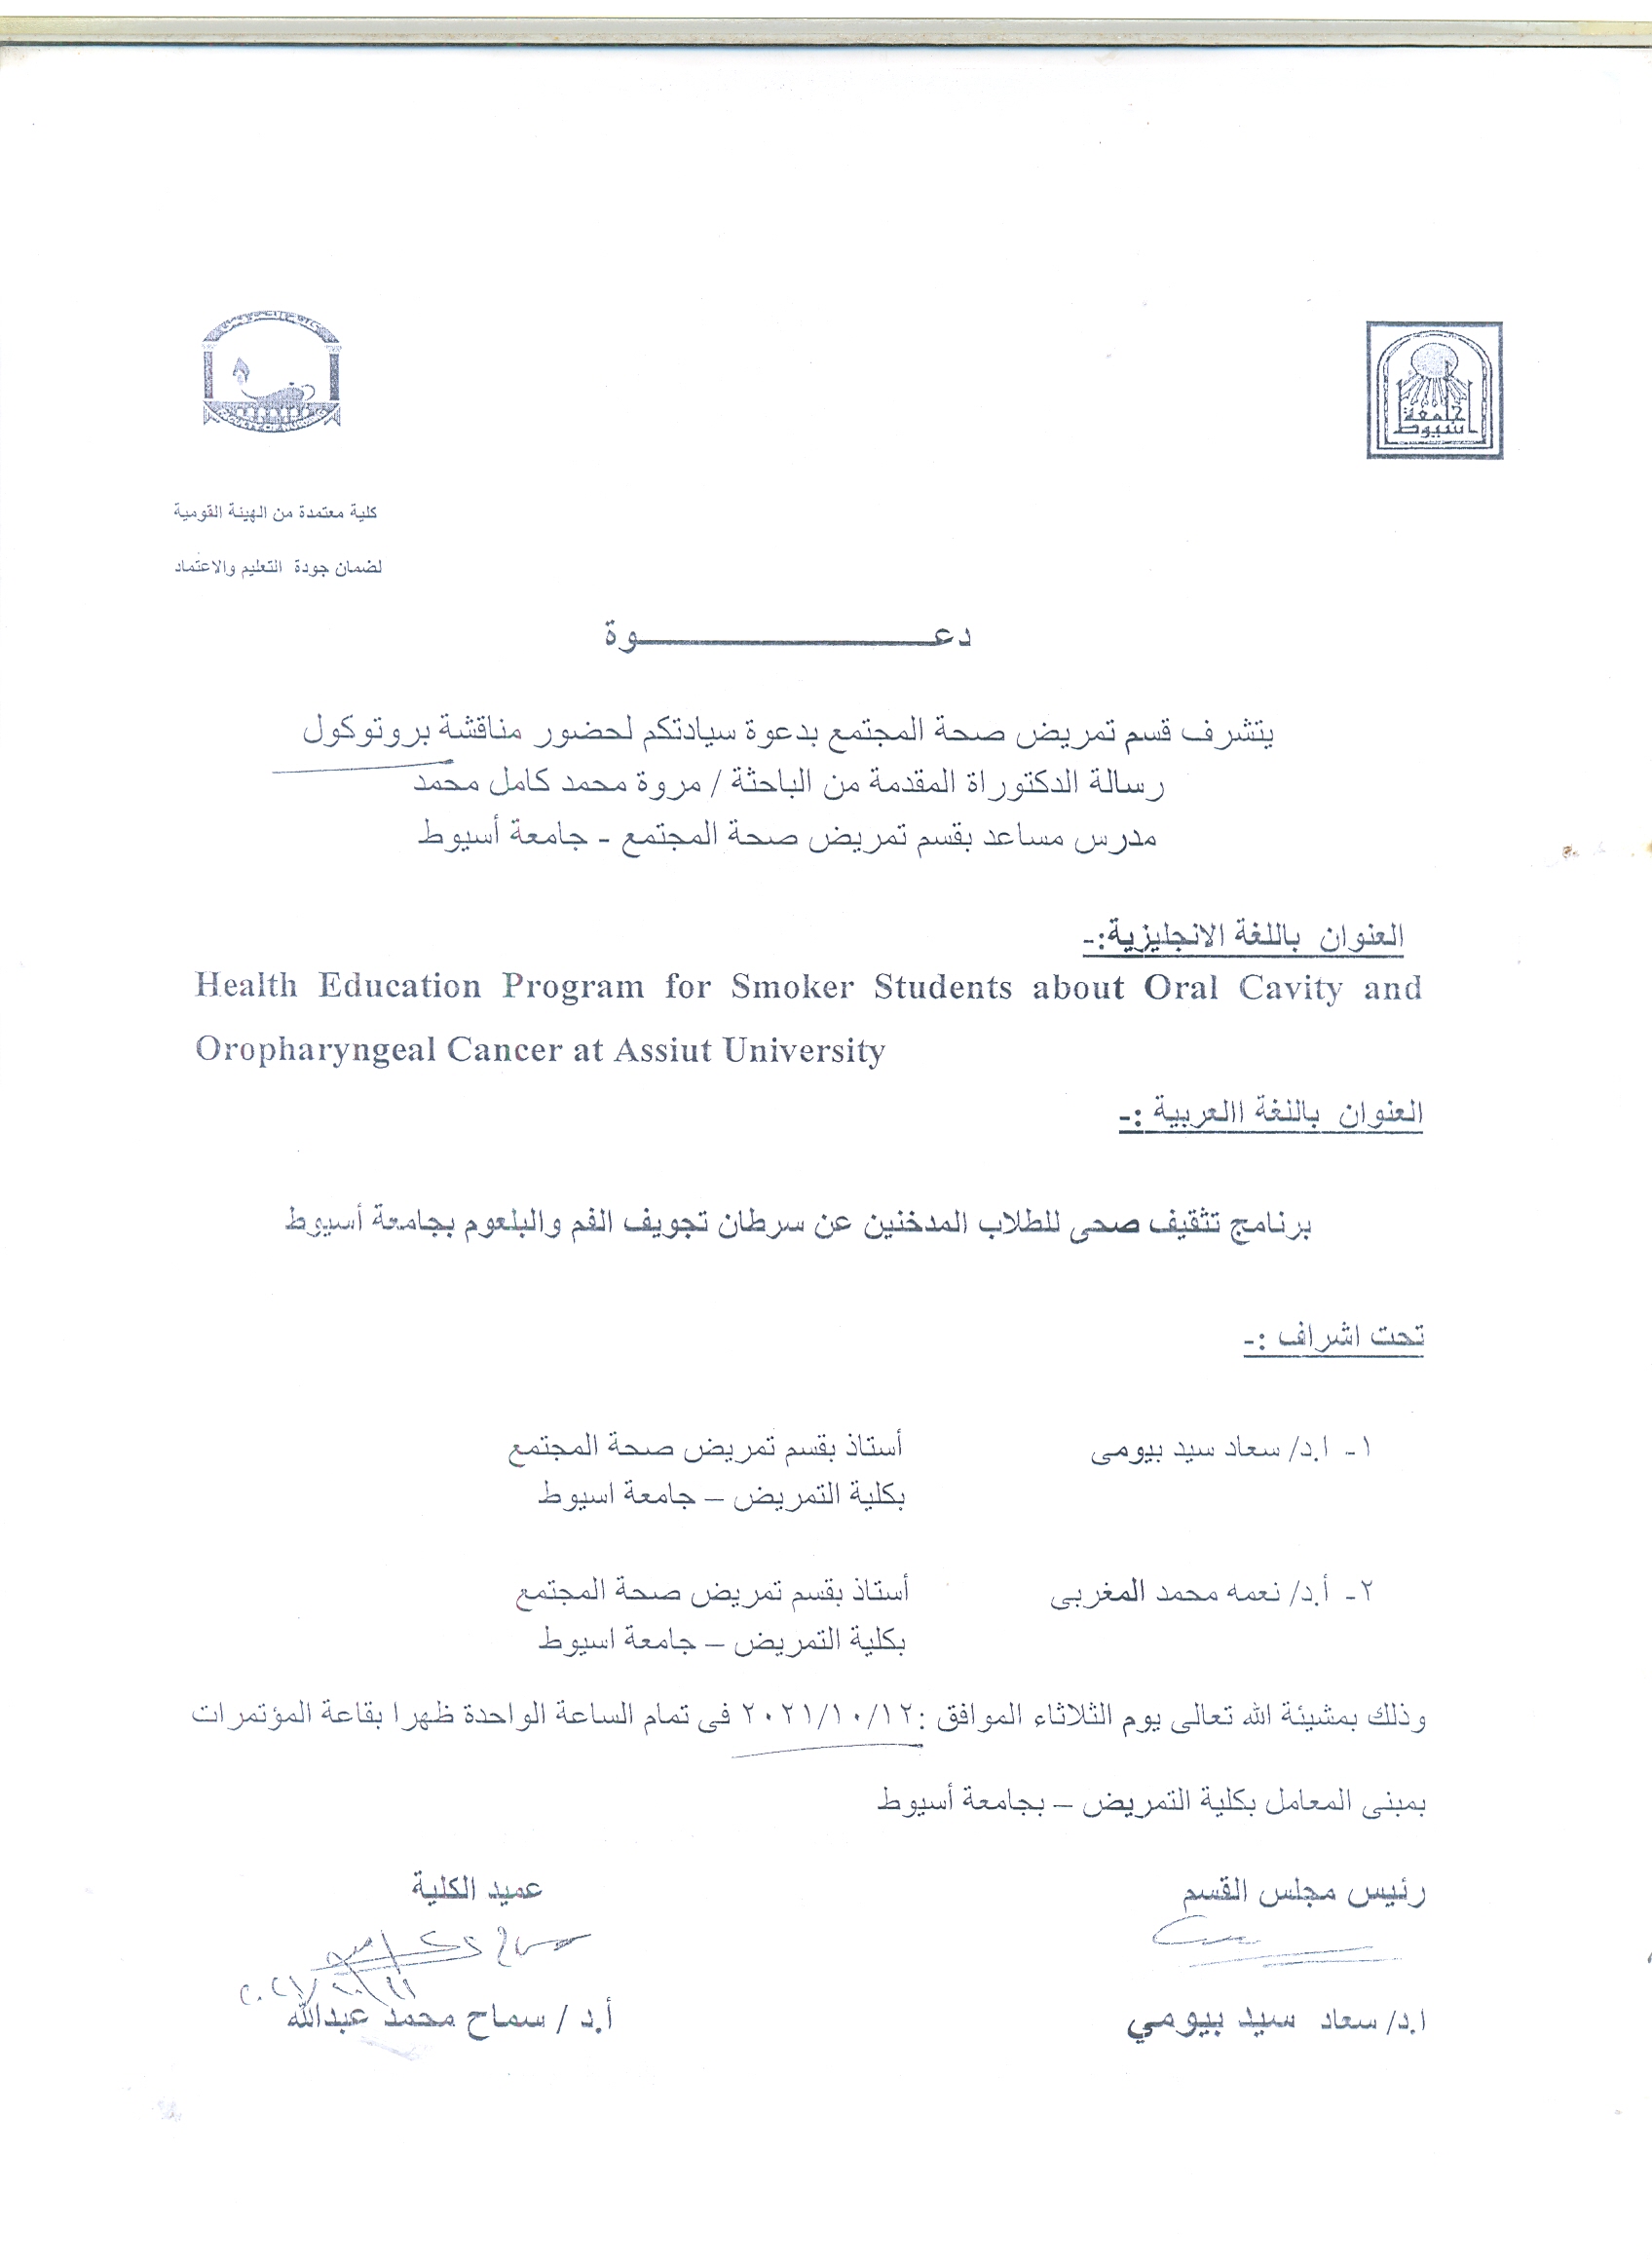 Protocol of master thesis submitted by researcher/ Marwa Mohamed Kamel Mohamed